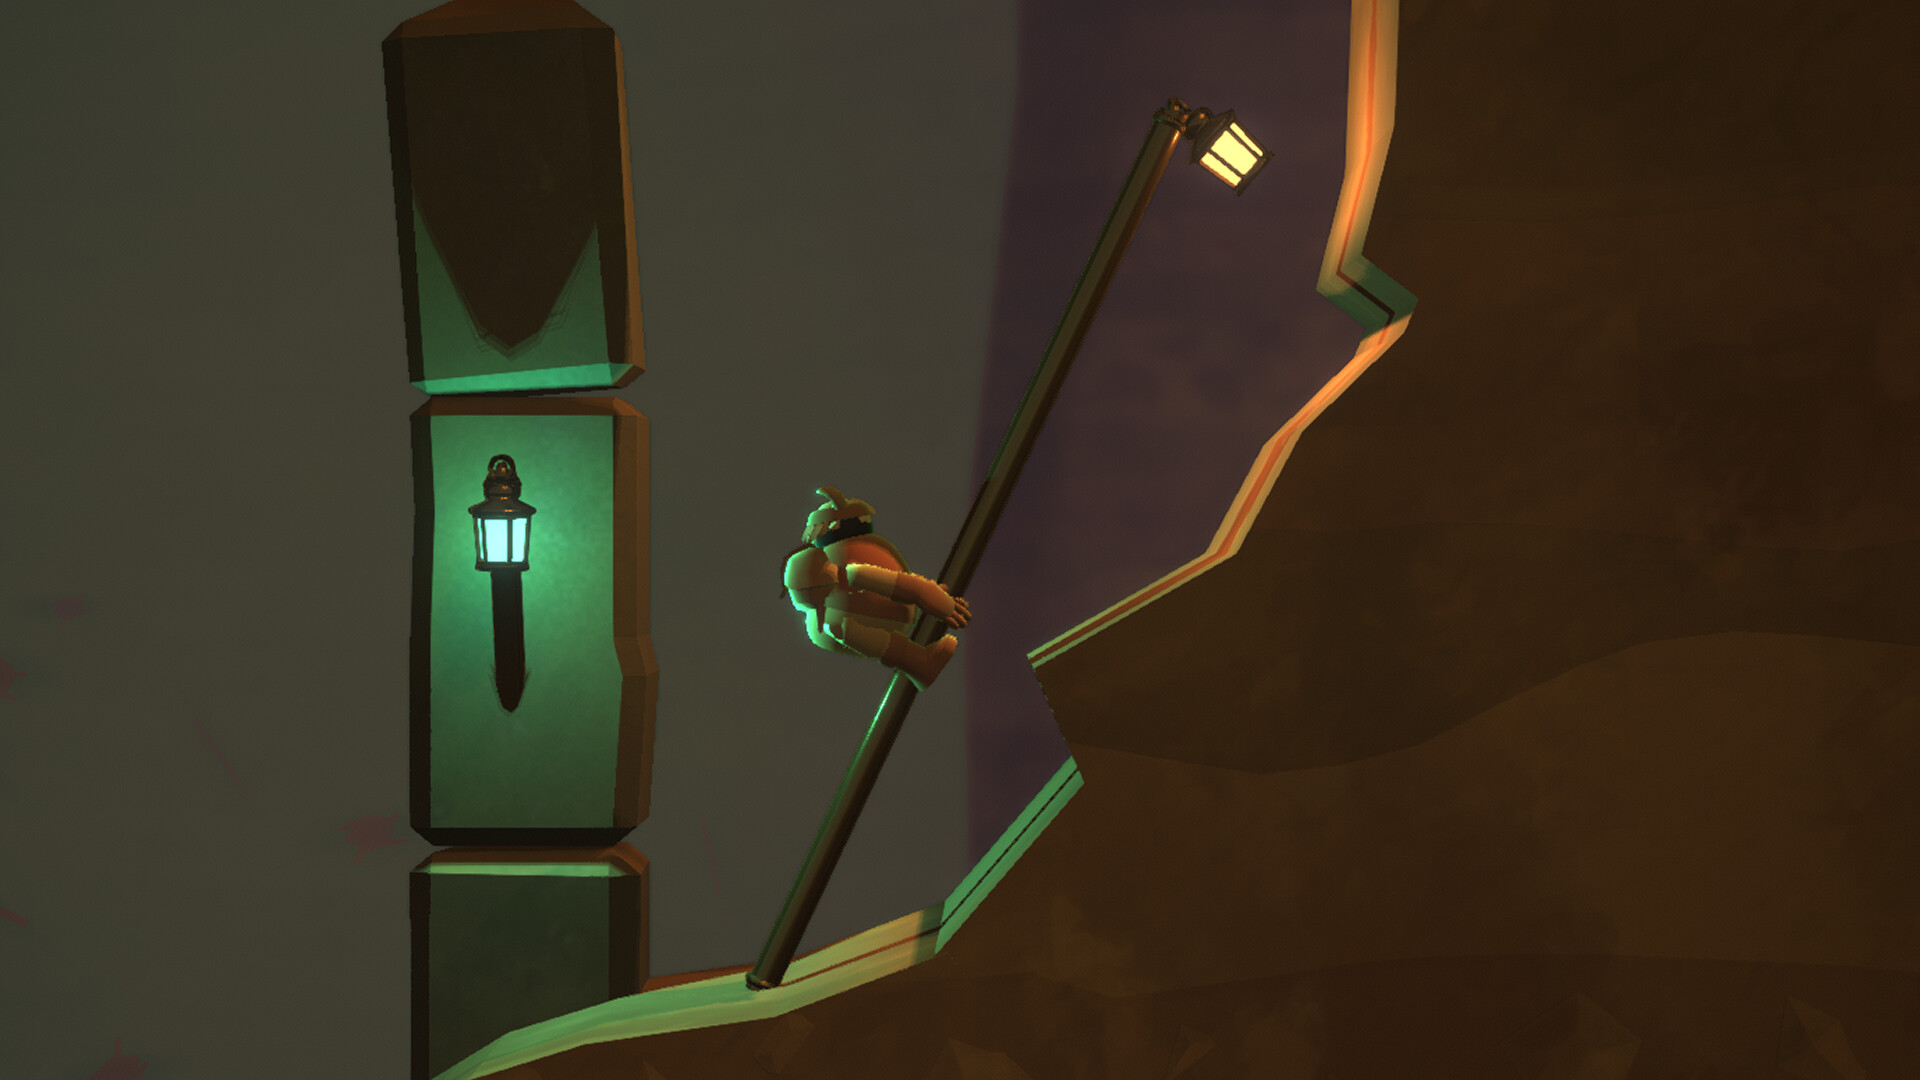 A difficult game about climbing читы. A difficult game about Climbing.